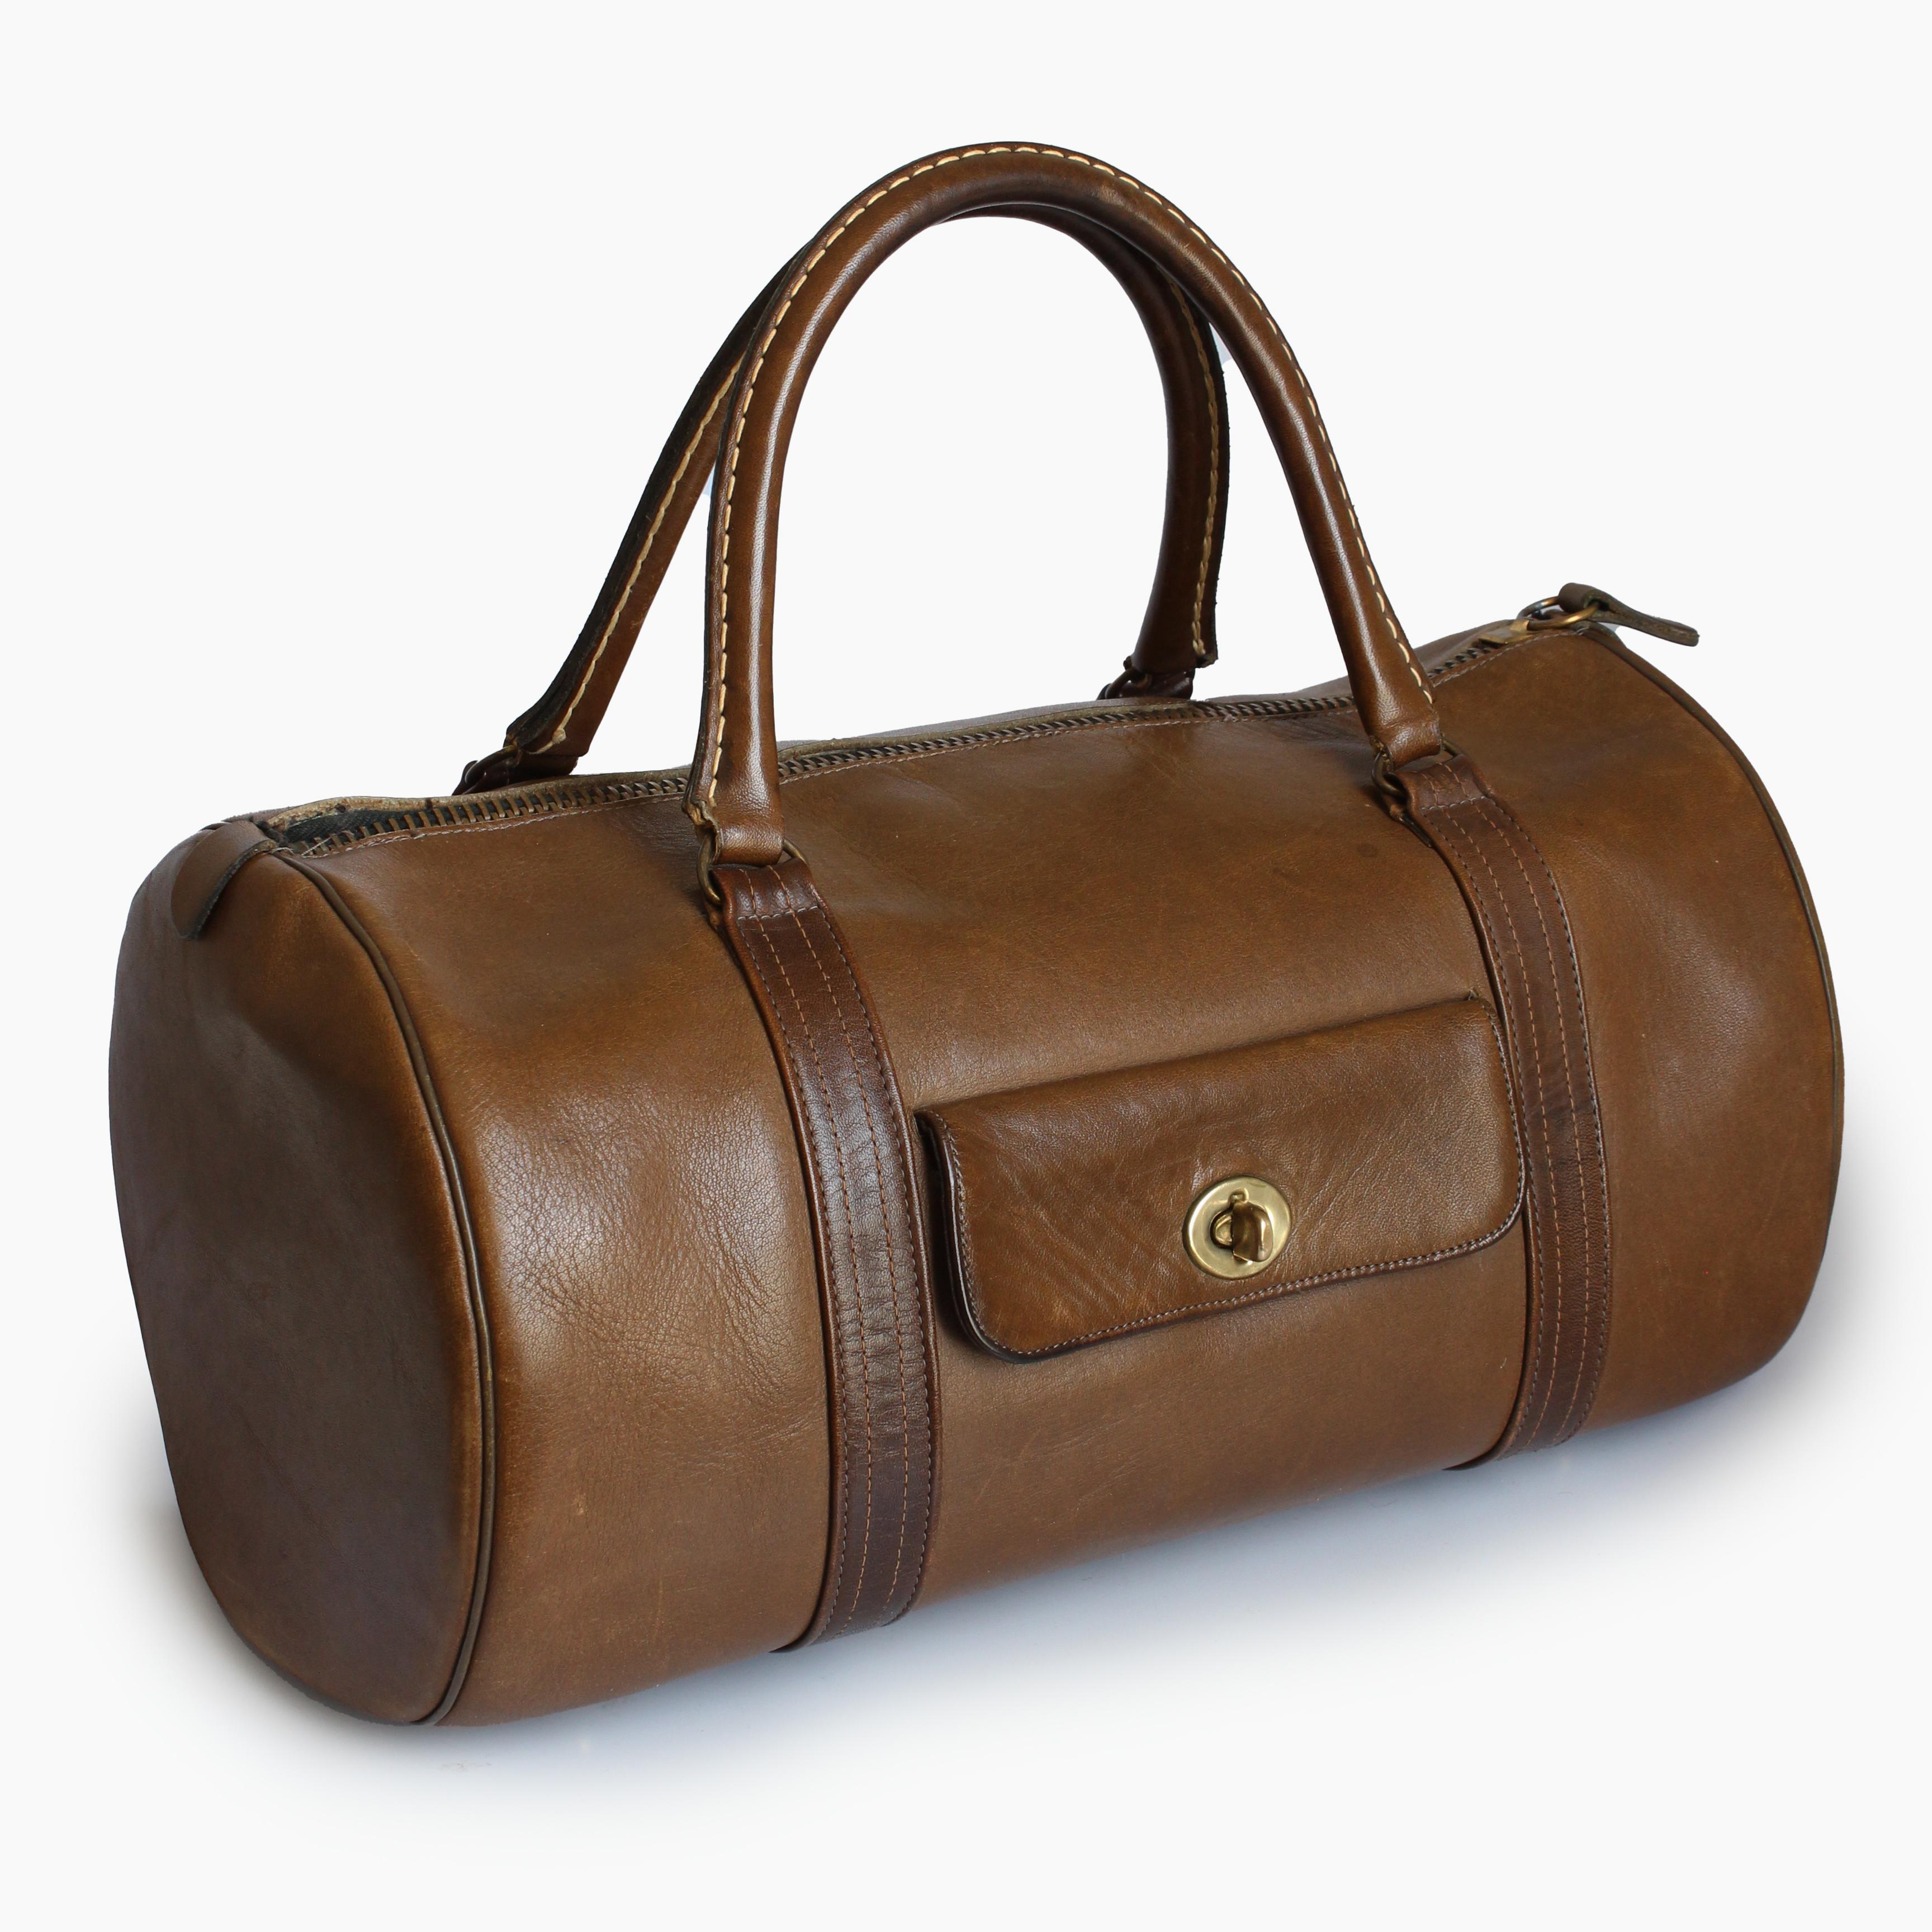 This incredibly rare bag was designed by Bonnie Cashin for Coach Leatherware, most likely in the late 60s, as part of her Safari collection (see image 2, where this style can be seen in a photo of Bonnie's studio). Made from a supple tabac brown